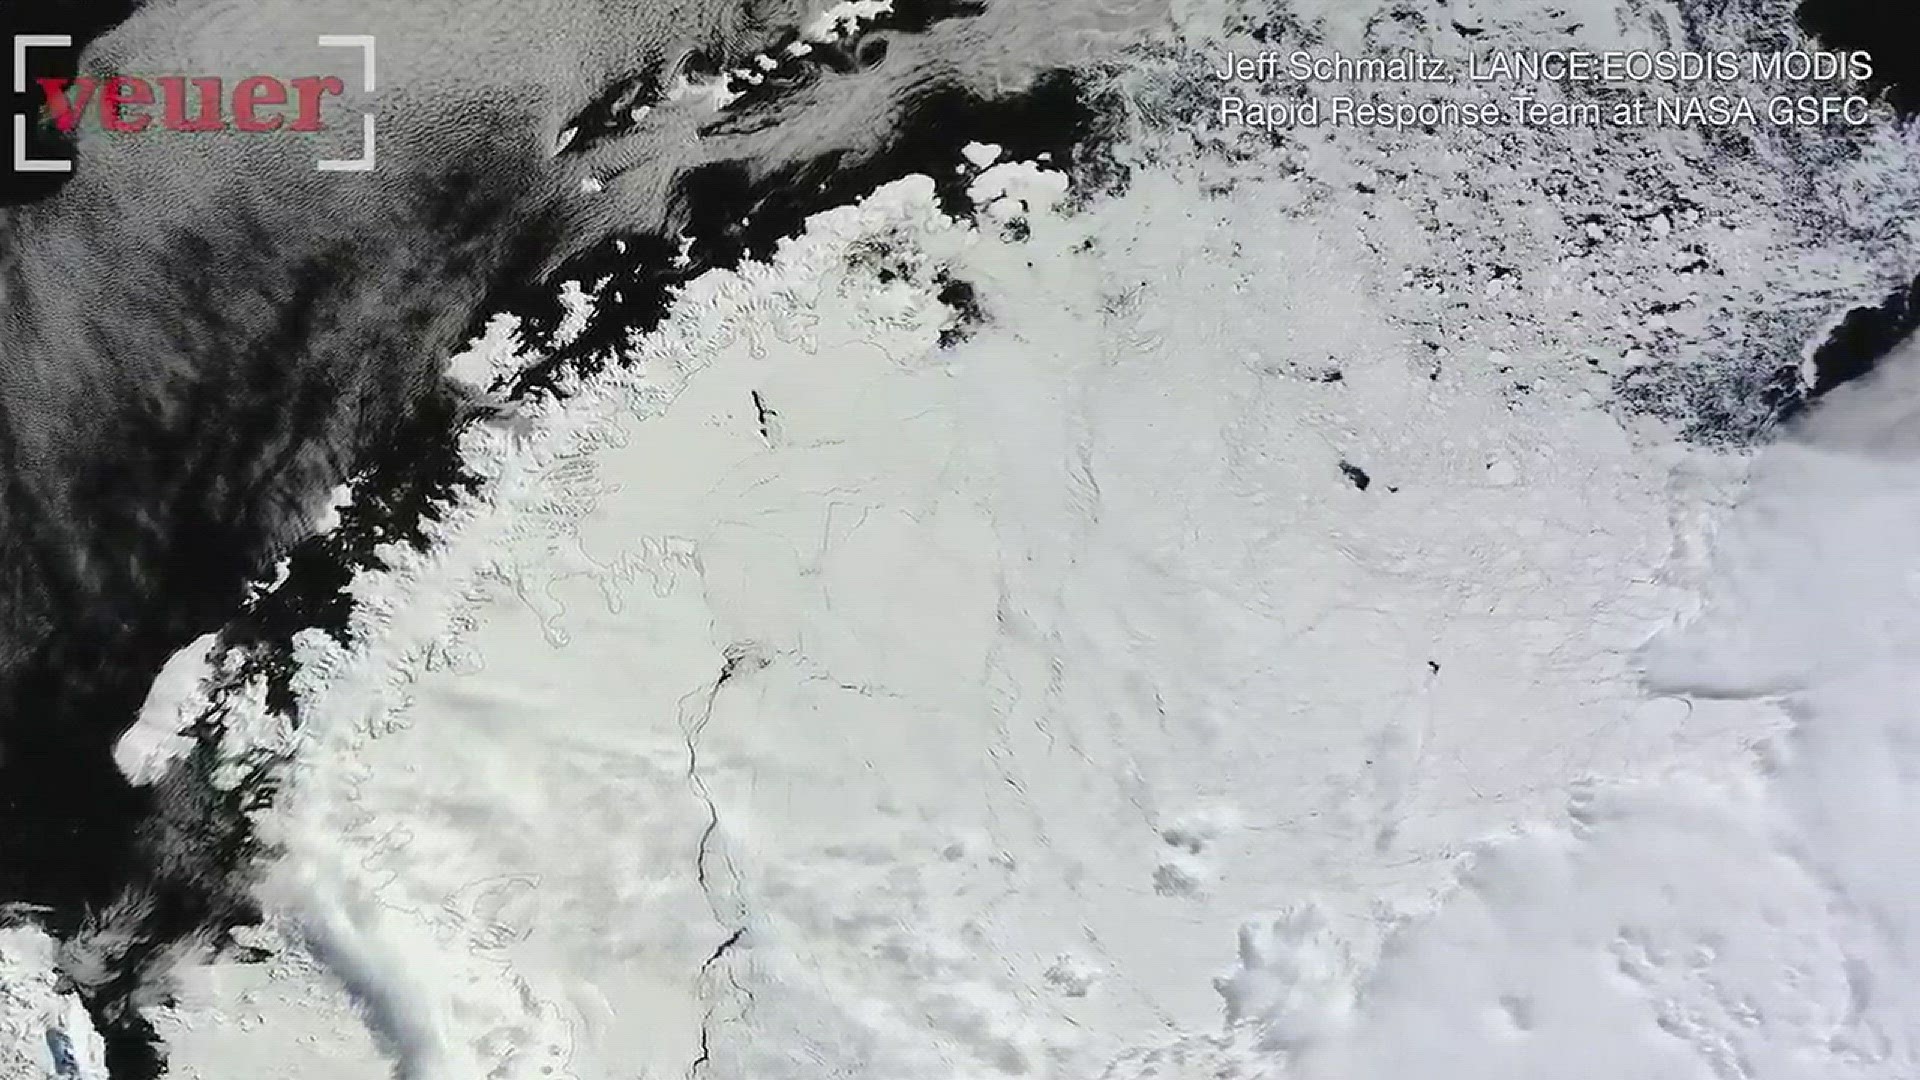 There's a giant hole in Antarctica and scientists don't know why